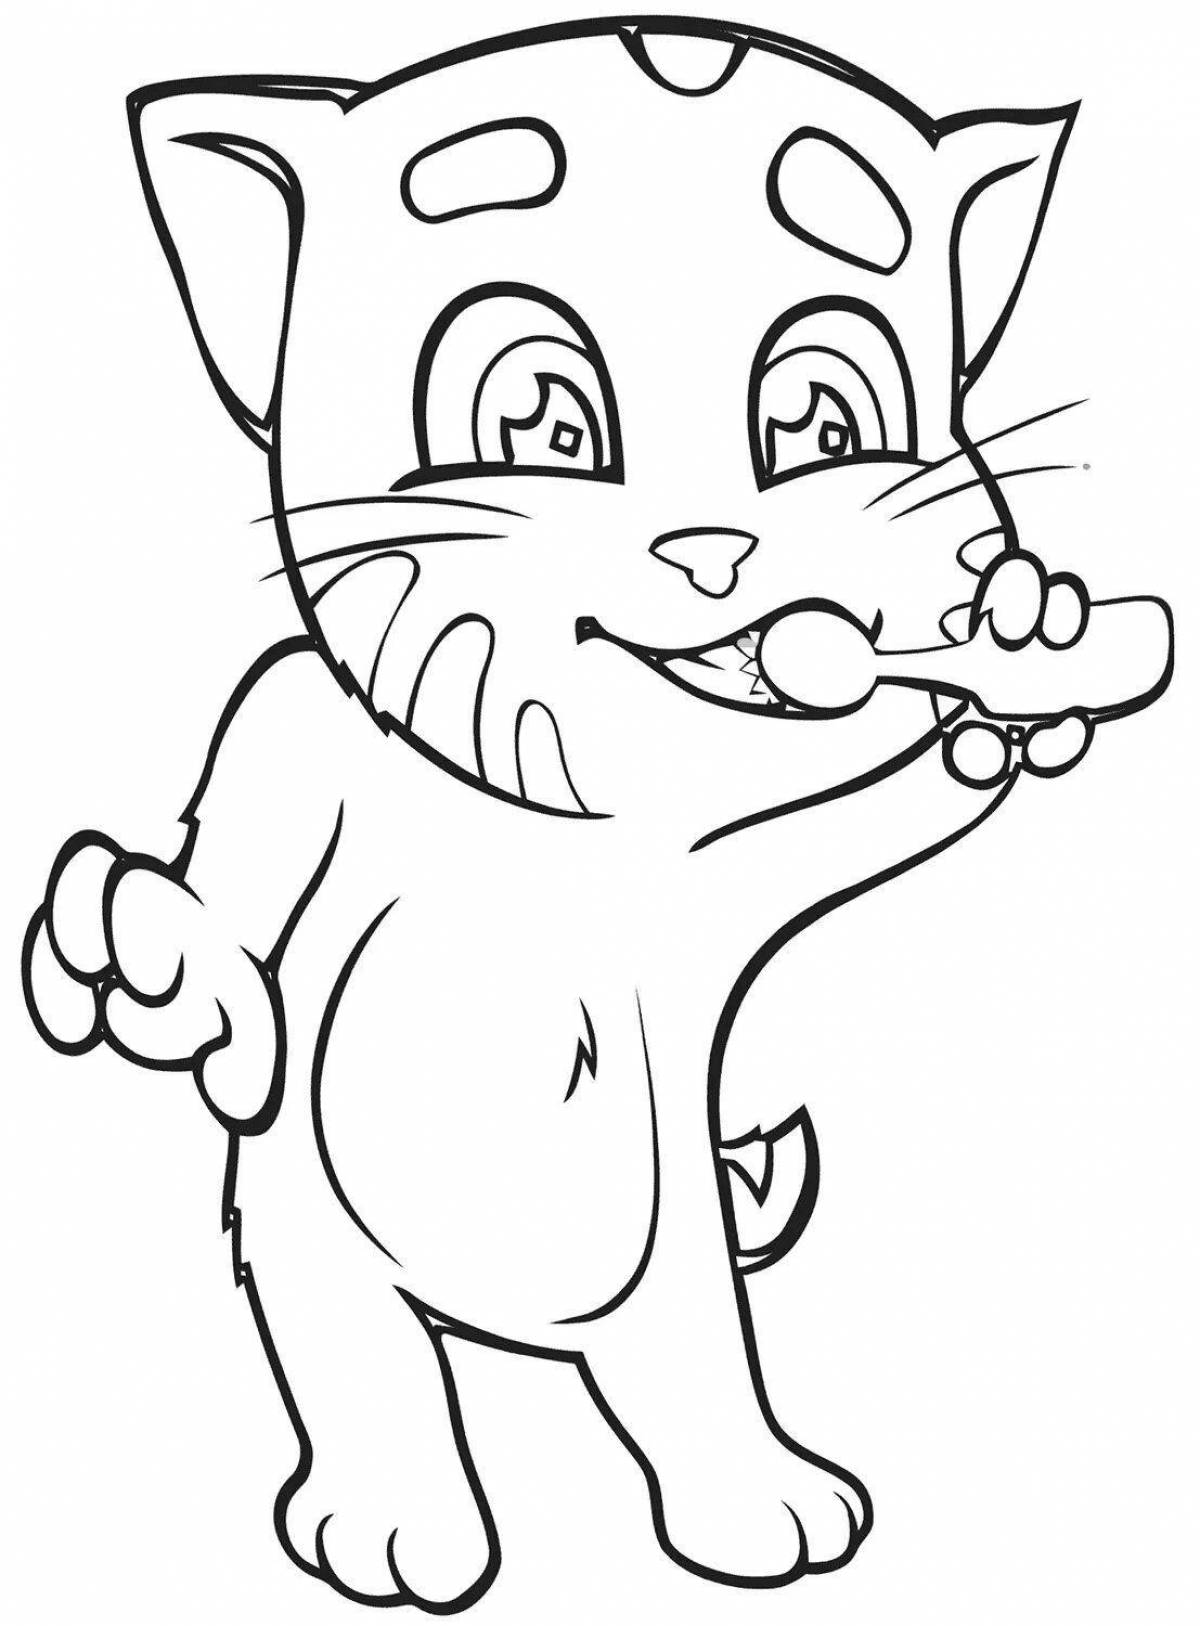 Coloring book radiant cat tom and angela